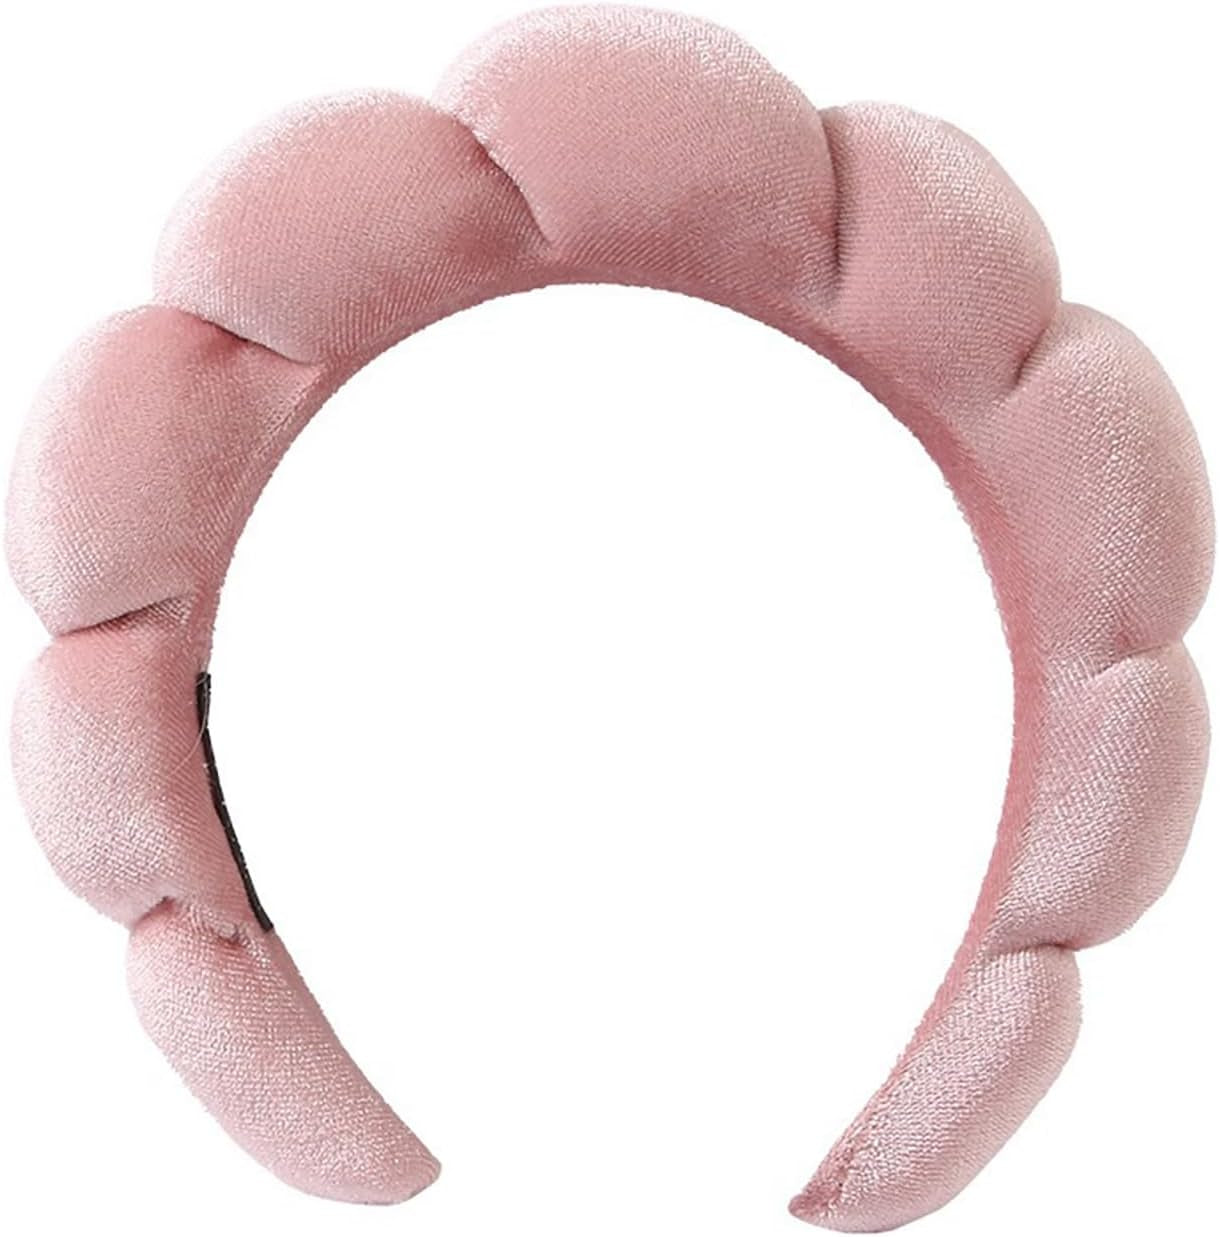 Puffy Makeup Headband Spa Headbands for Women Sponge & Terry Towel Cloth Fabric Cute Skincare Headband for Face Washing, Makeup Removal, Shower, Facial Mask (Pink)